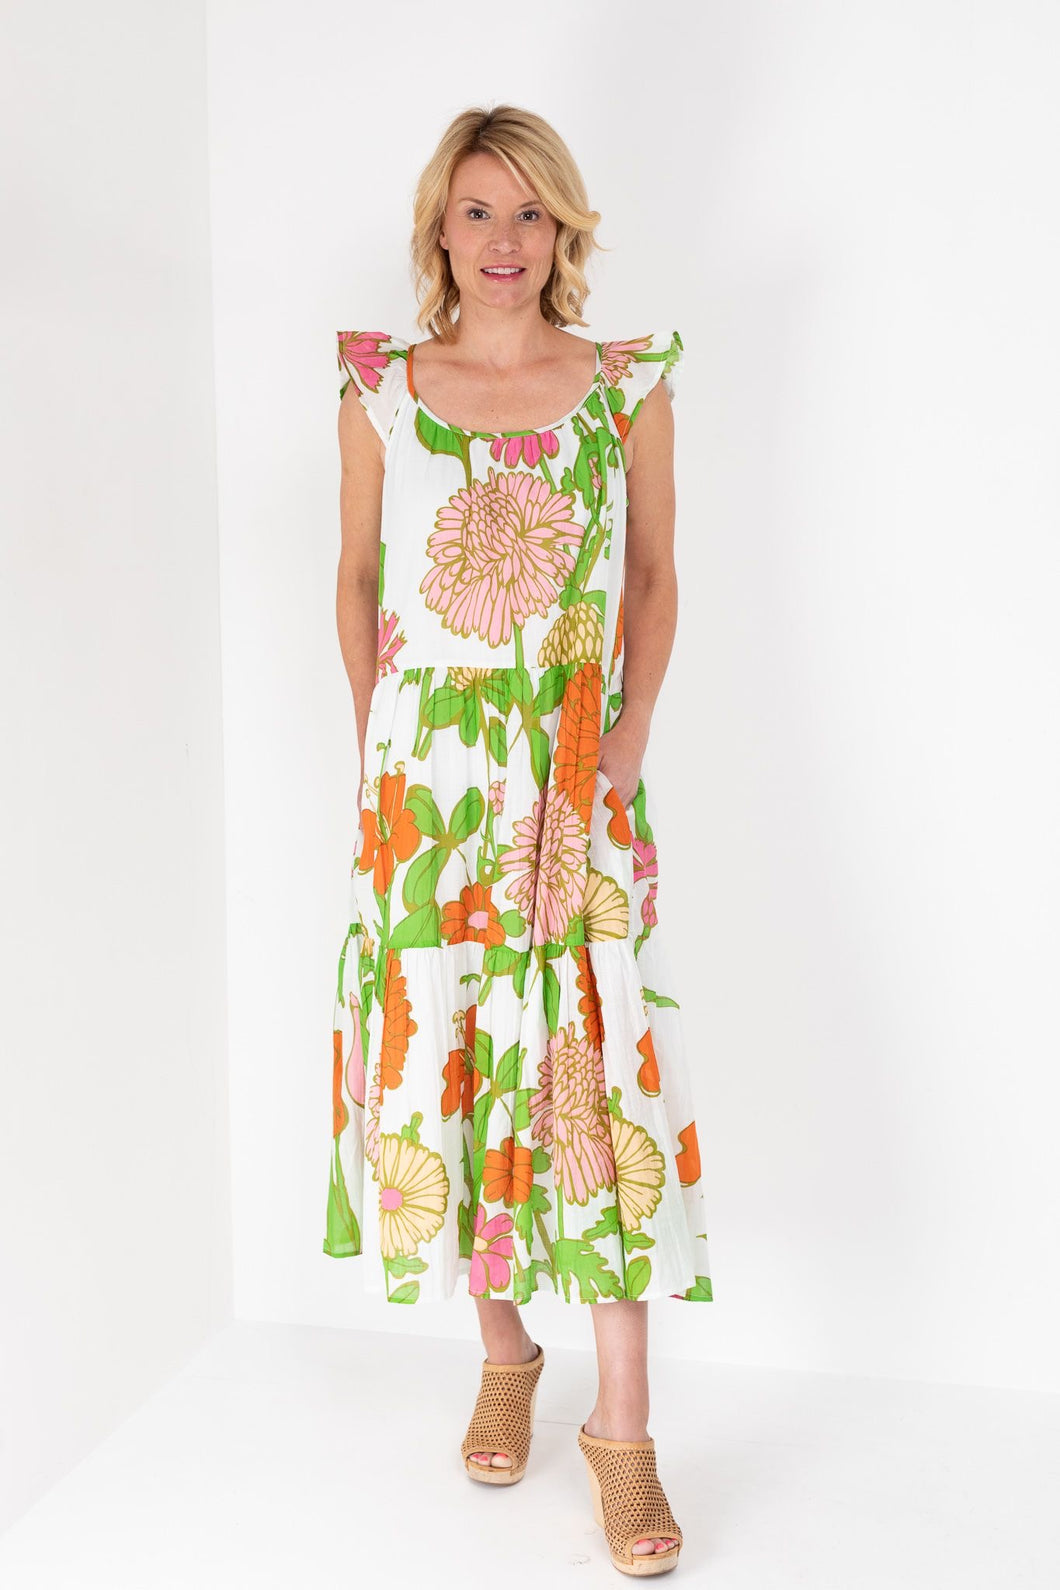 Milly Dress in Mod Floral Melon